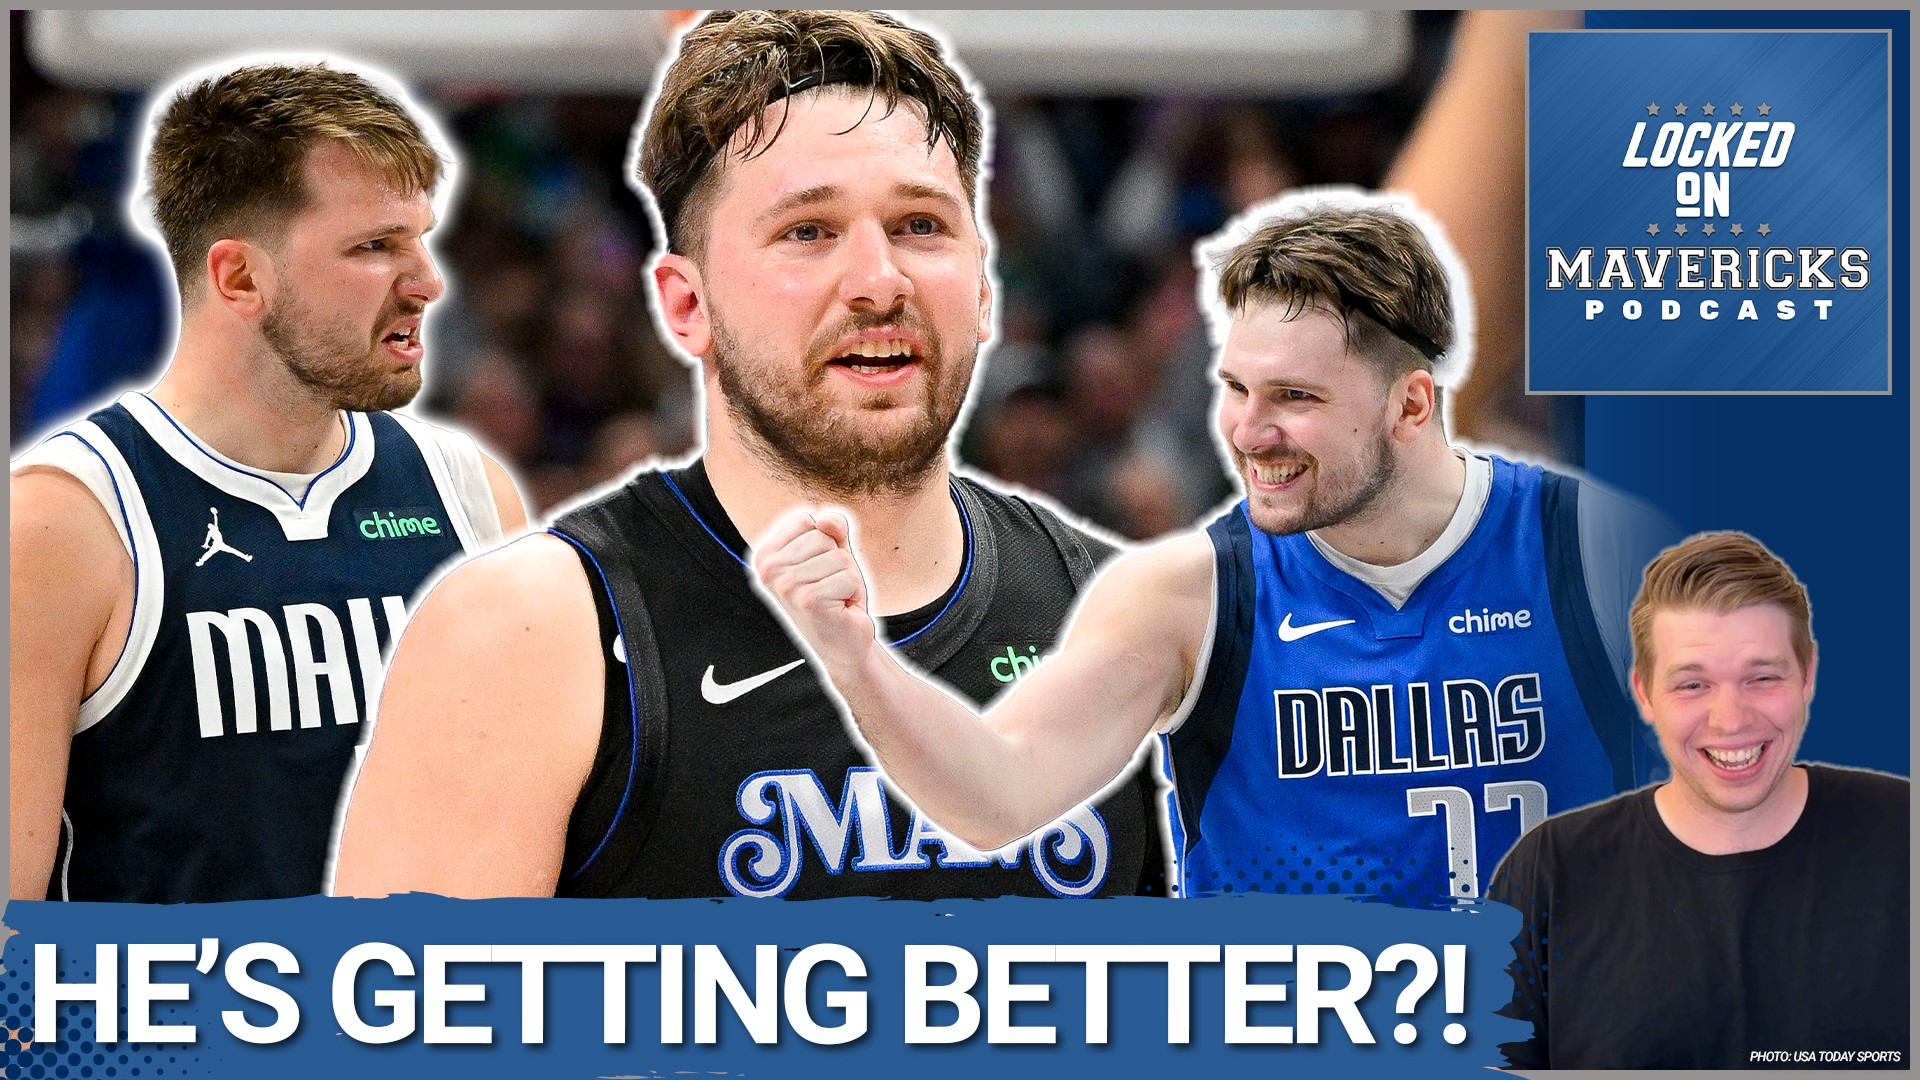 Nick Angstadt explains how Luka Doncic is still getting better and how the Dallas Mavericks have been different since their trades.